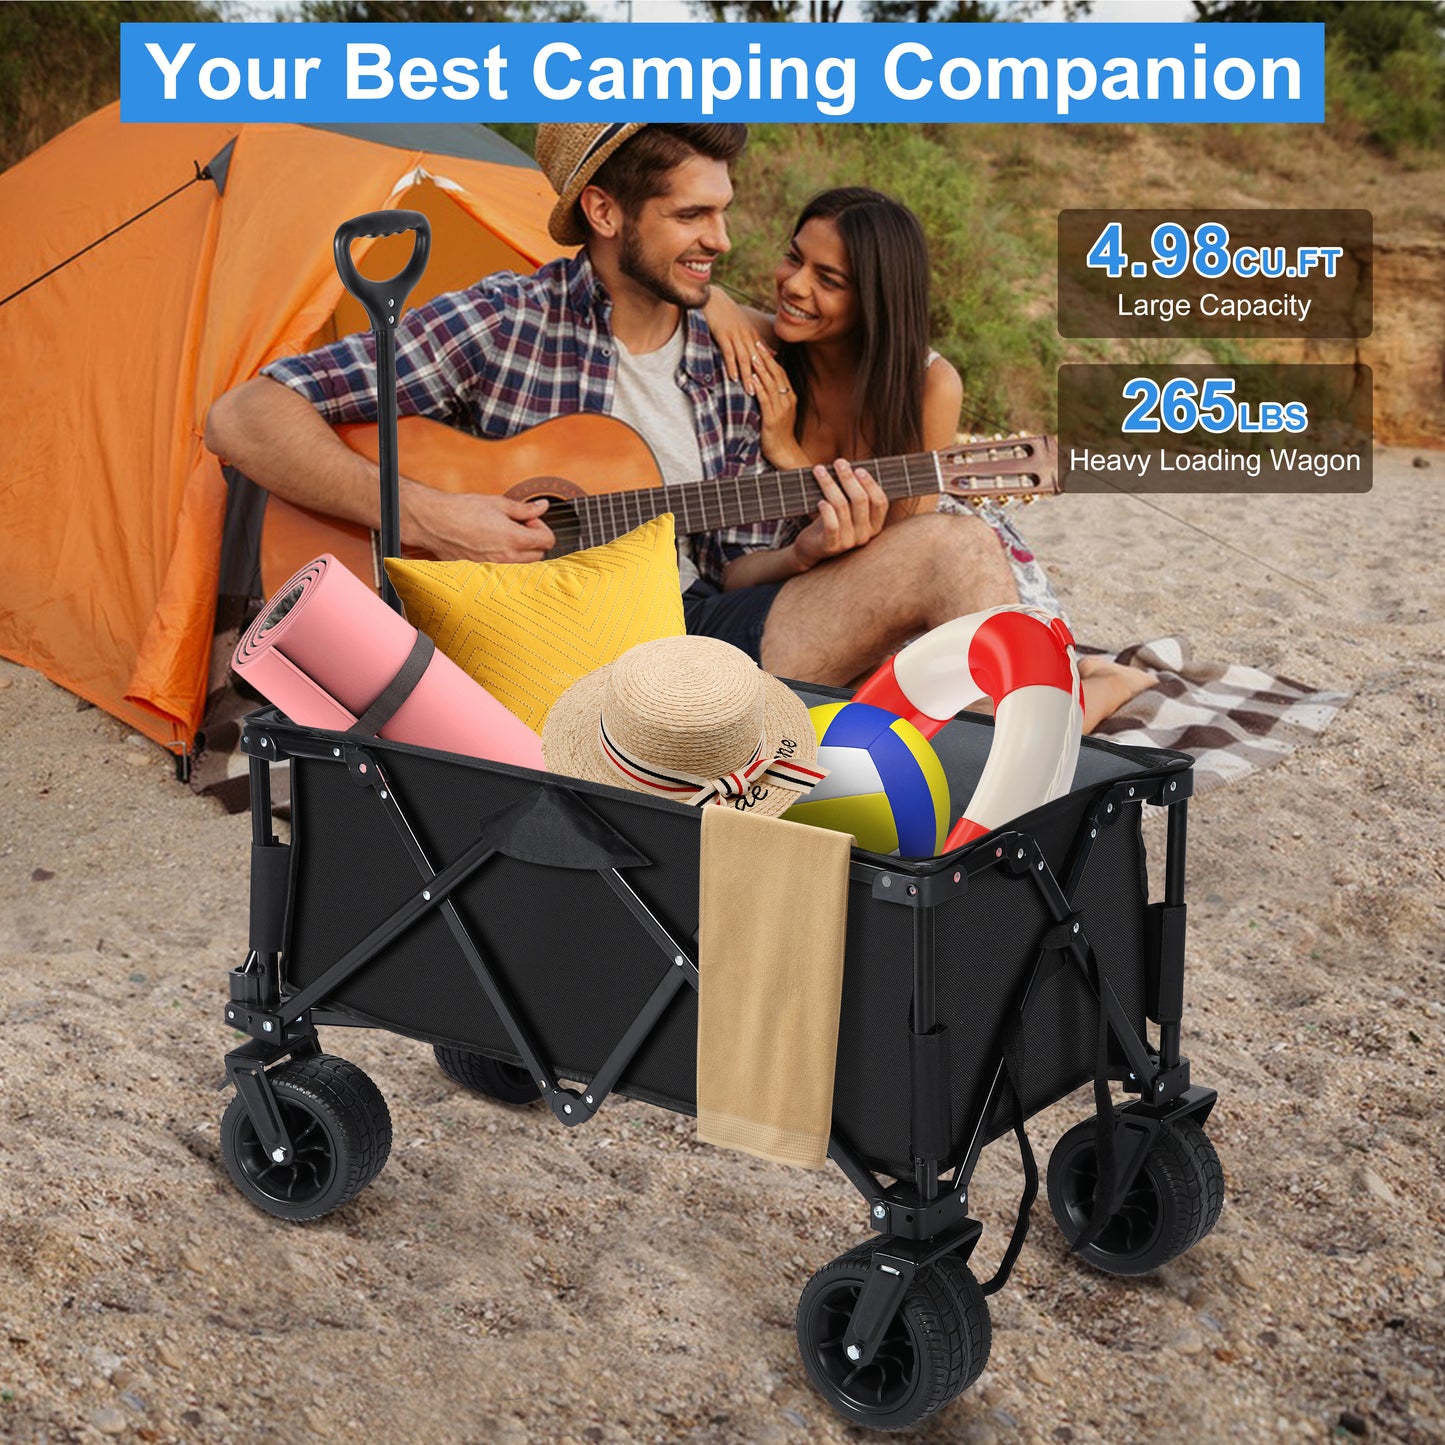 Outdoor Camping Vehicle, Black